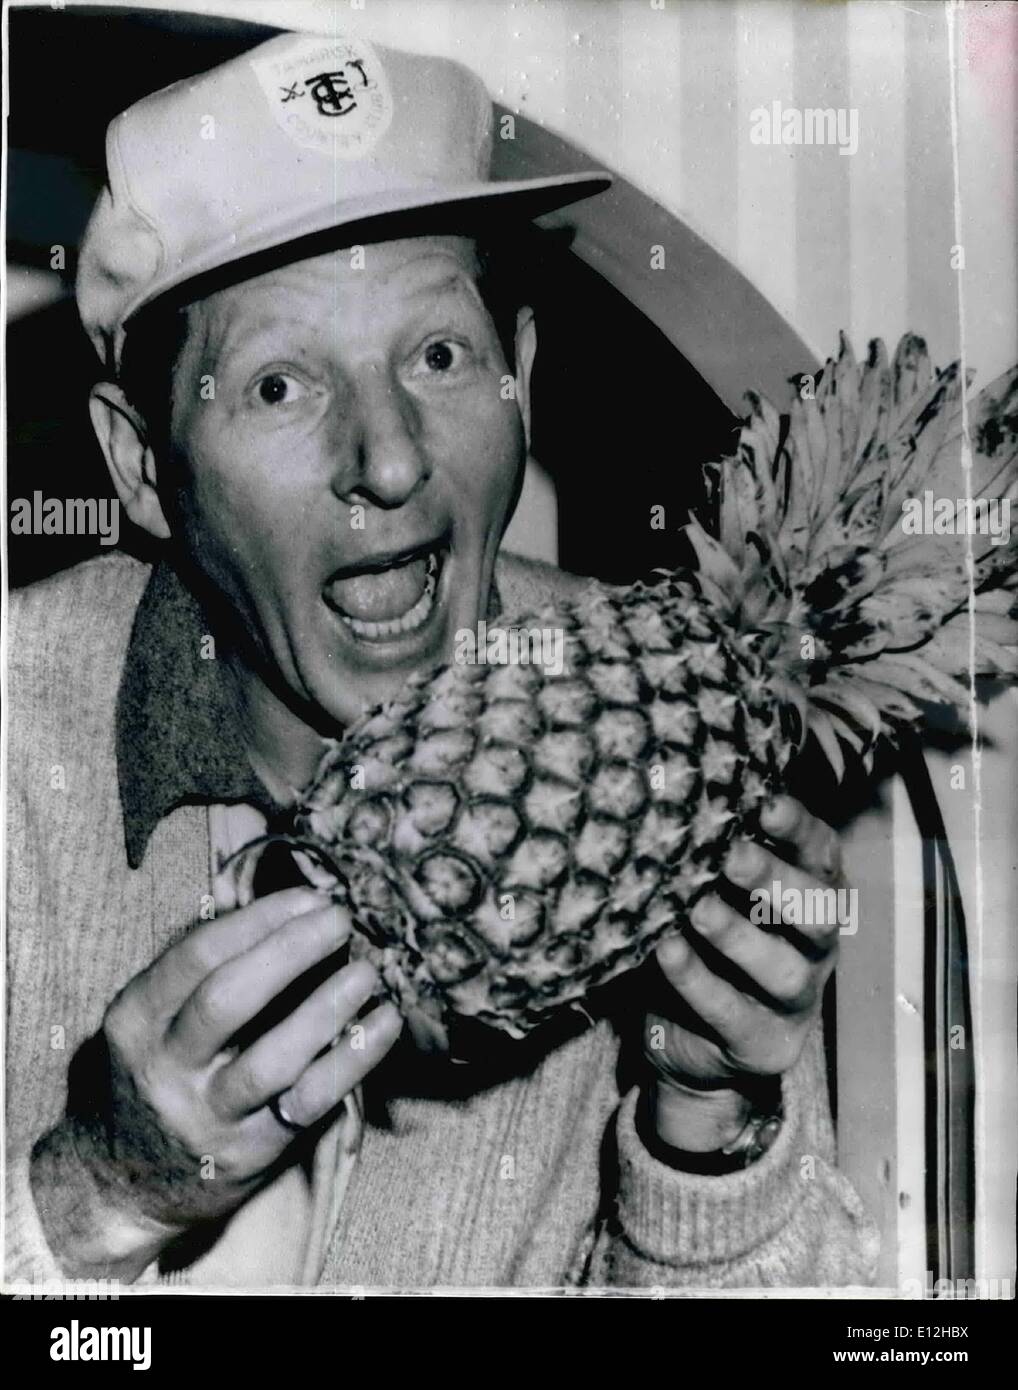 Jan. 04, 2012 - Danny Kaye Has Fun - at Australian Zoo... Takes a Bite at a Pineapple. The fur really began to fly - when popular film comedian Danny Kaye recently paid a visit to Taronga Zoo, Sydney - during his recent trip to Sydney, Australia. It started off with an impromptu 'carrot' fight between Danny and the Gorilla ''King Kong'' - and ended up by an exchange of half ripe pineapples... Here is Danny - as he takes a bite at his pineapple - the gift from the Taronga Zoo ''King Kong' Stock Photo